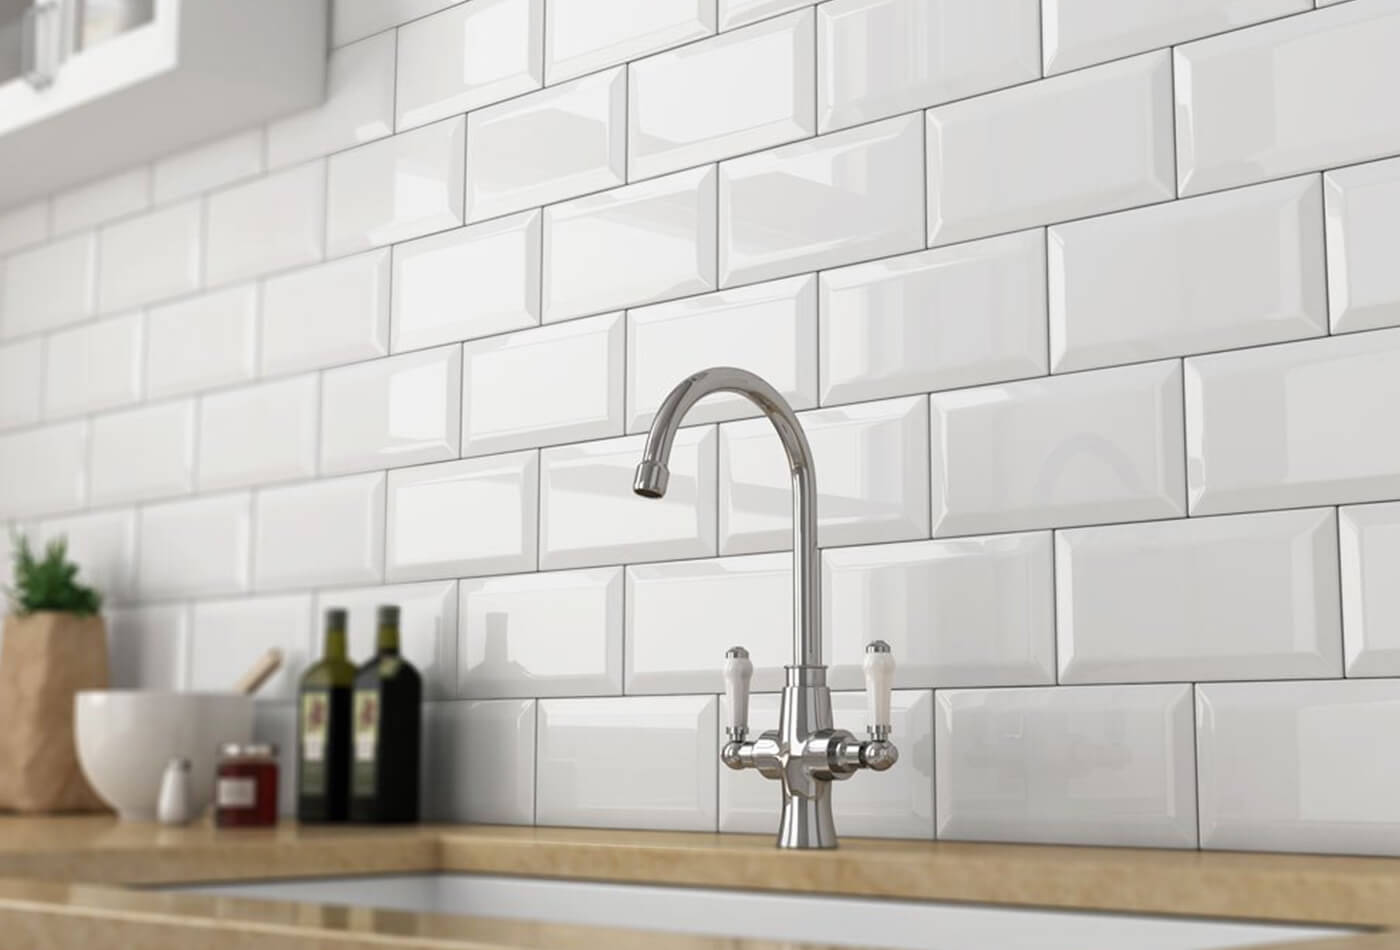 Wall Tiles: Delivering You The Best Tiles & Stones